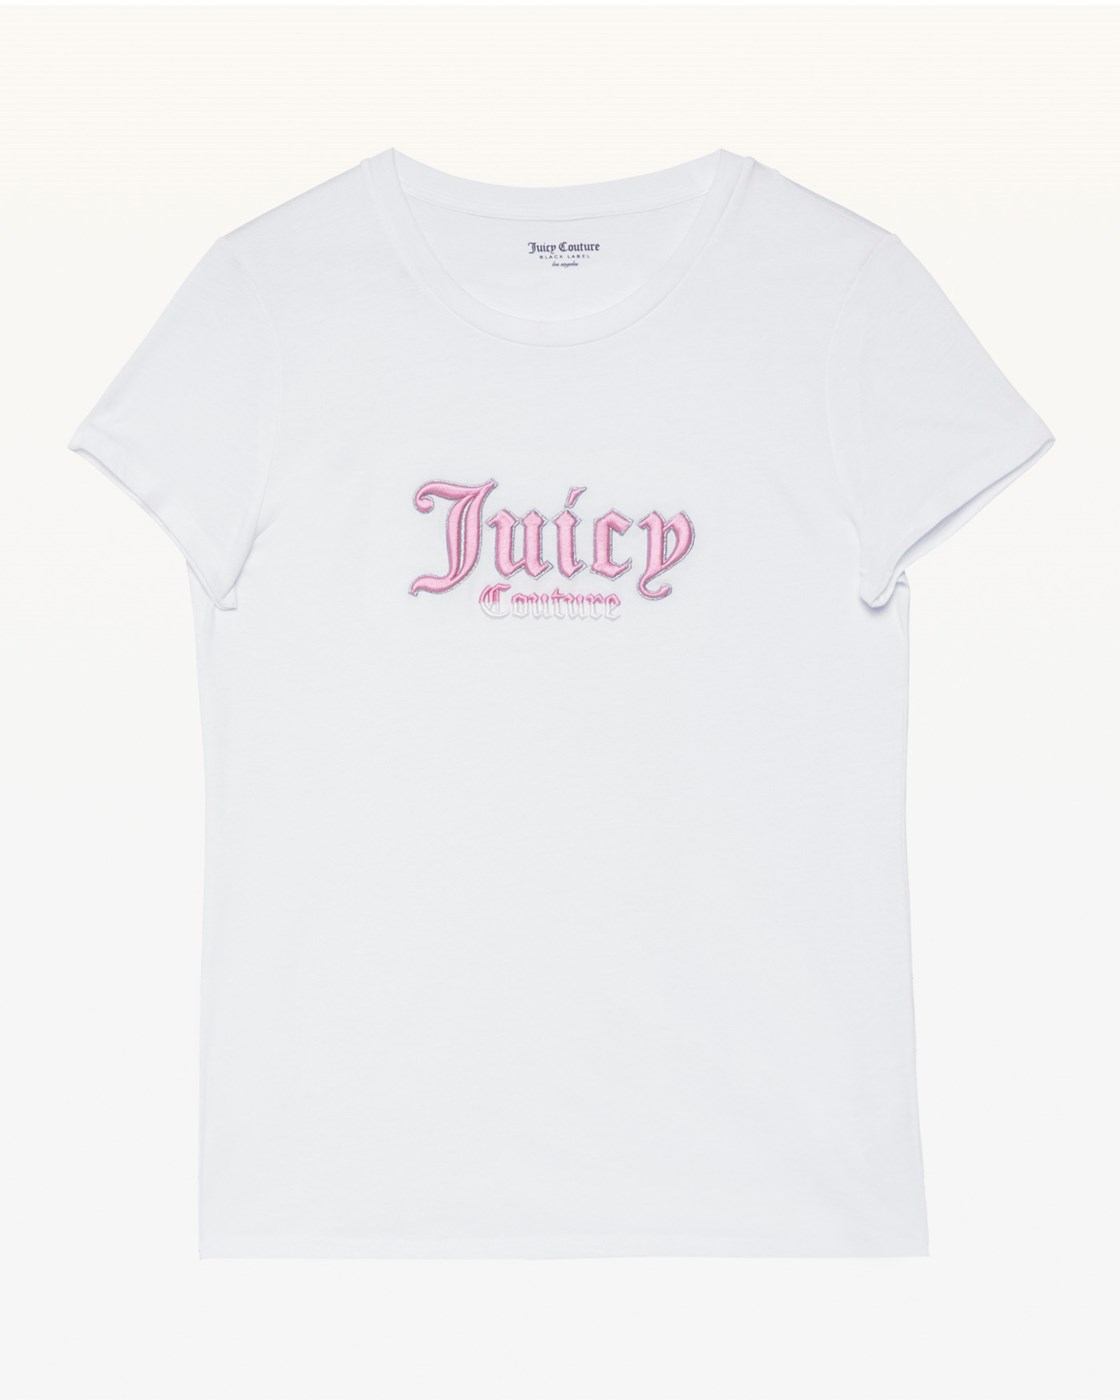 Juicy Couture Gothic Tee